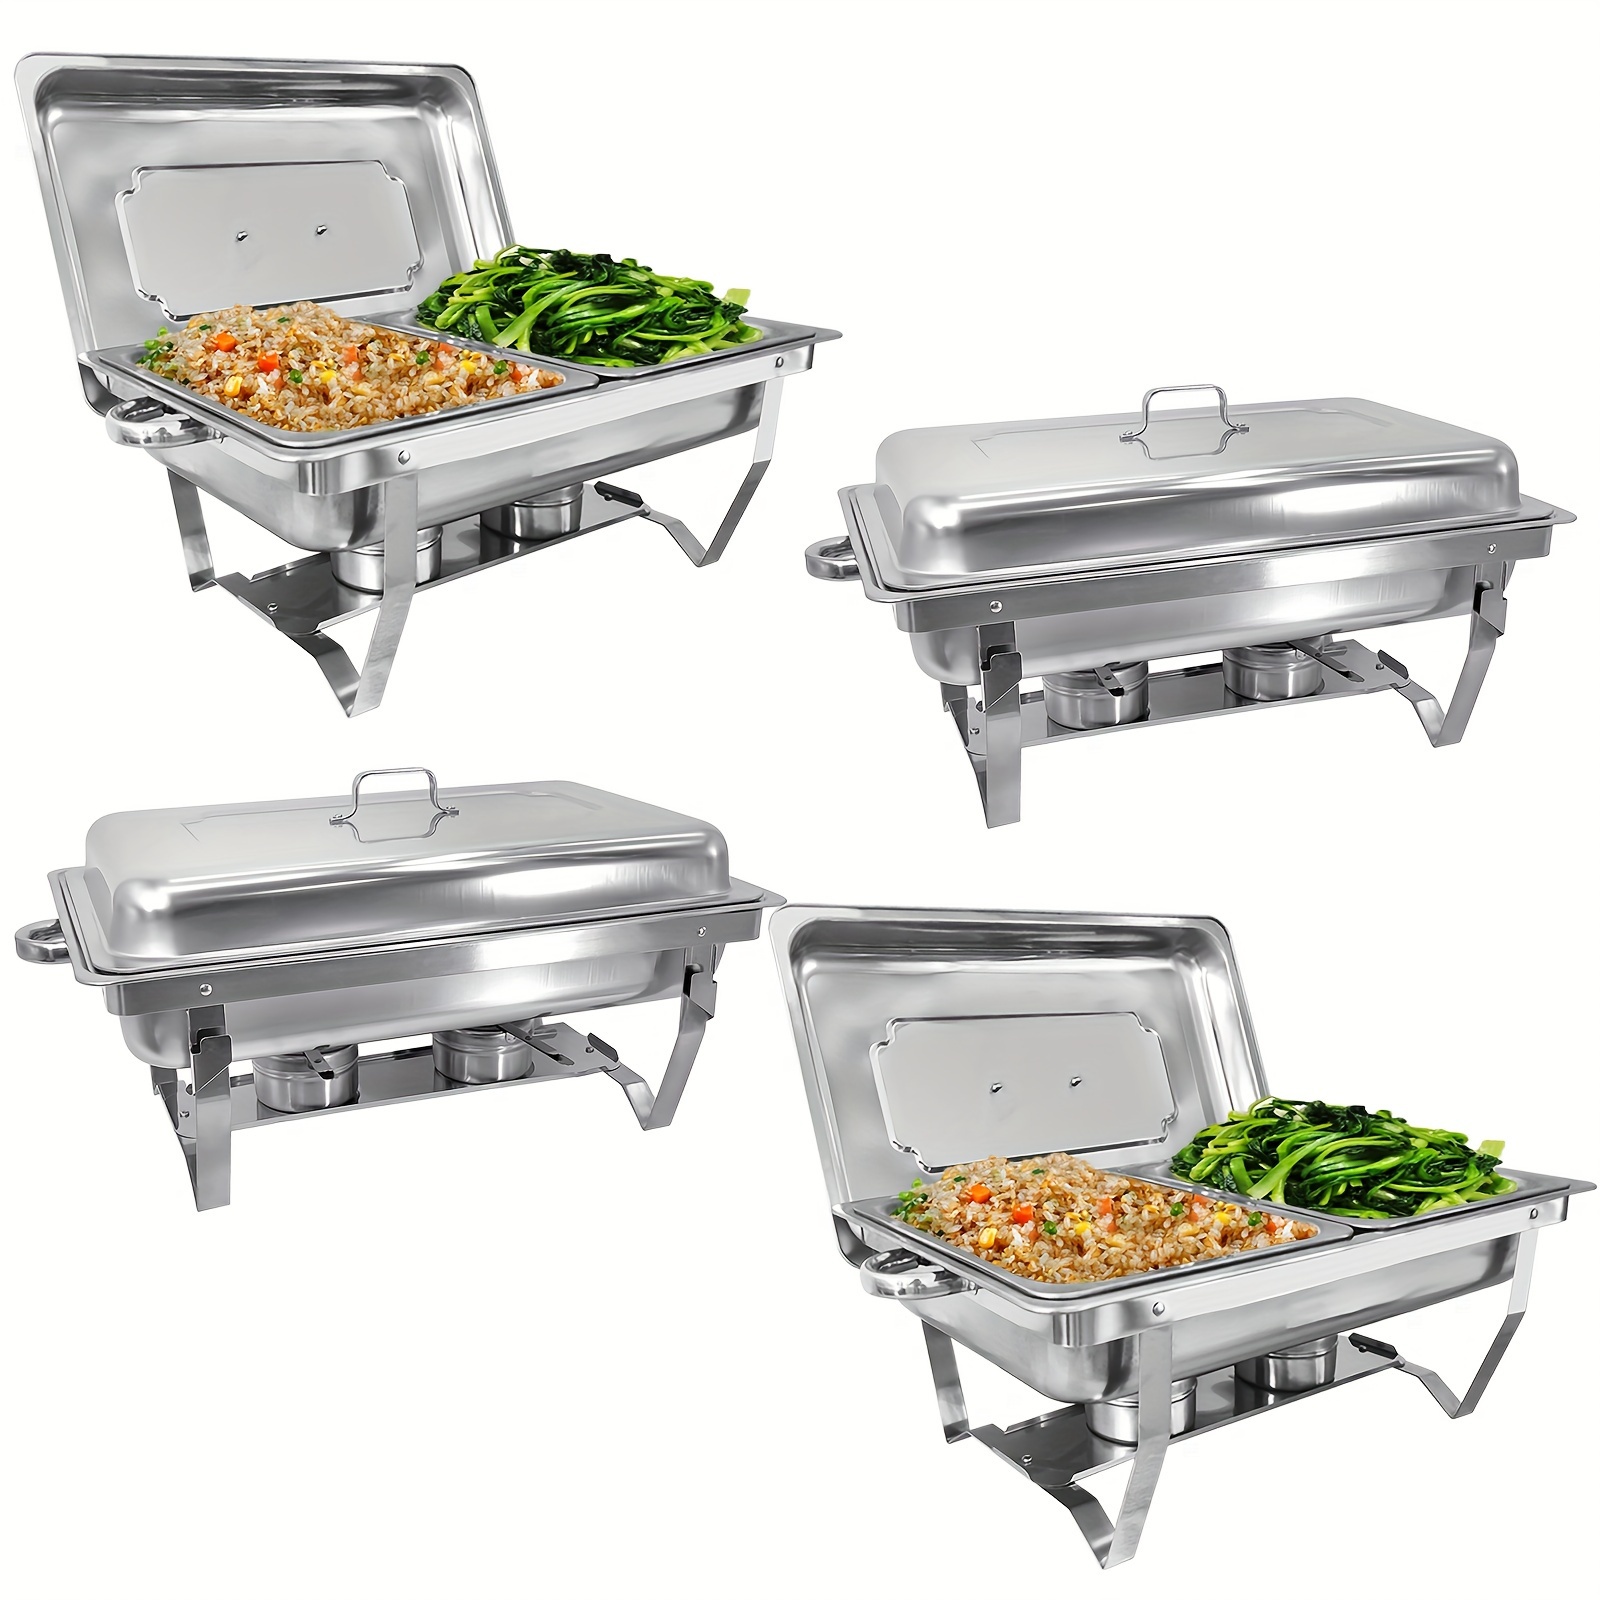 

5/7/9/10pcs, Chafing Dish Buffet Set, 8 Quart Stainless Steel Chafer Buffet Servers And Warmers Set With 1/2 Size Pan For Weddings, Parties, Banquets, Catering Events